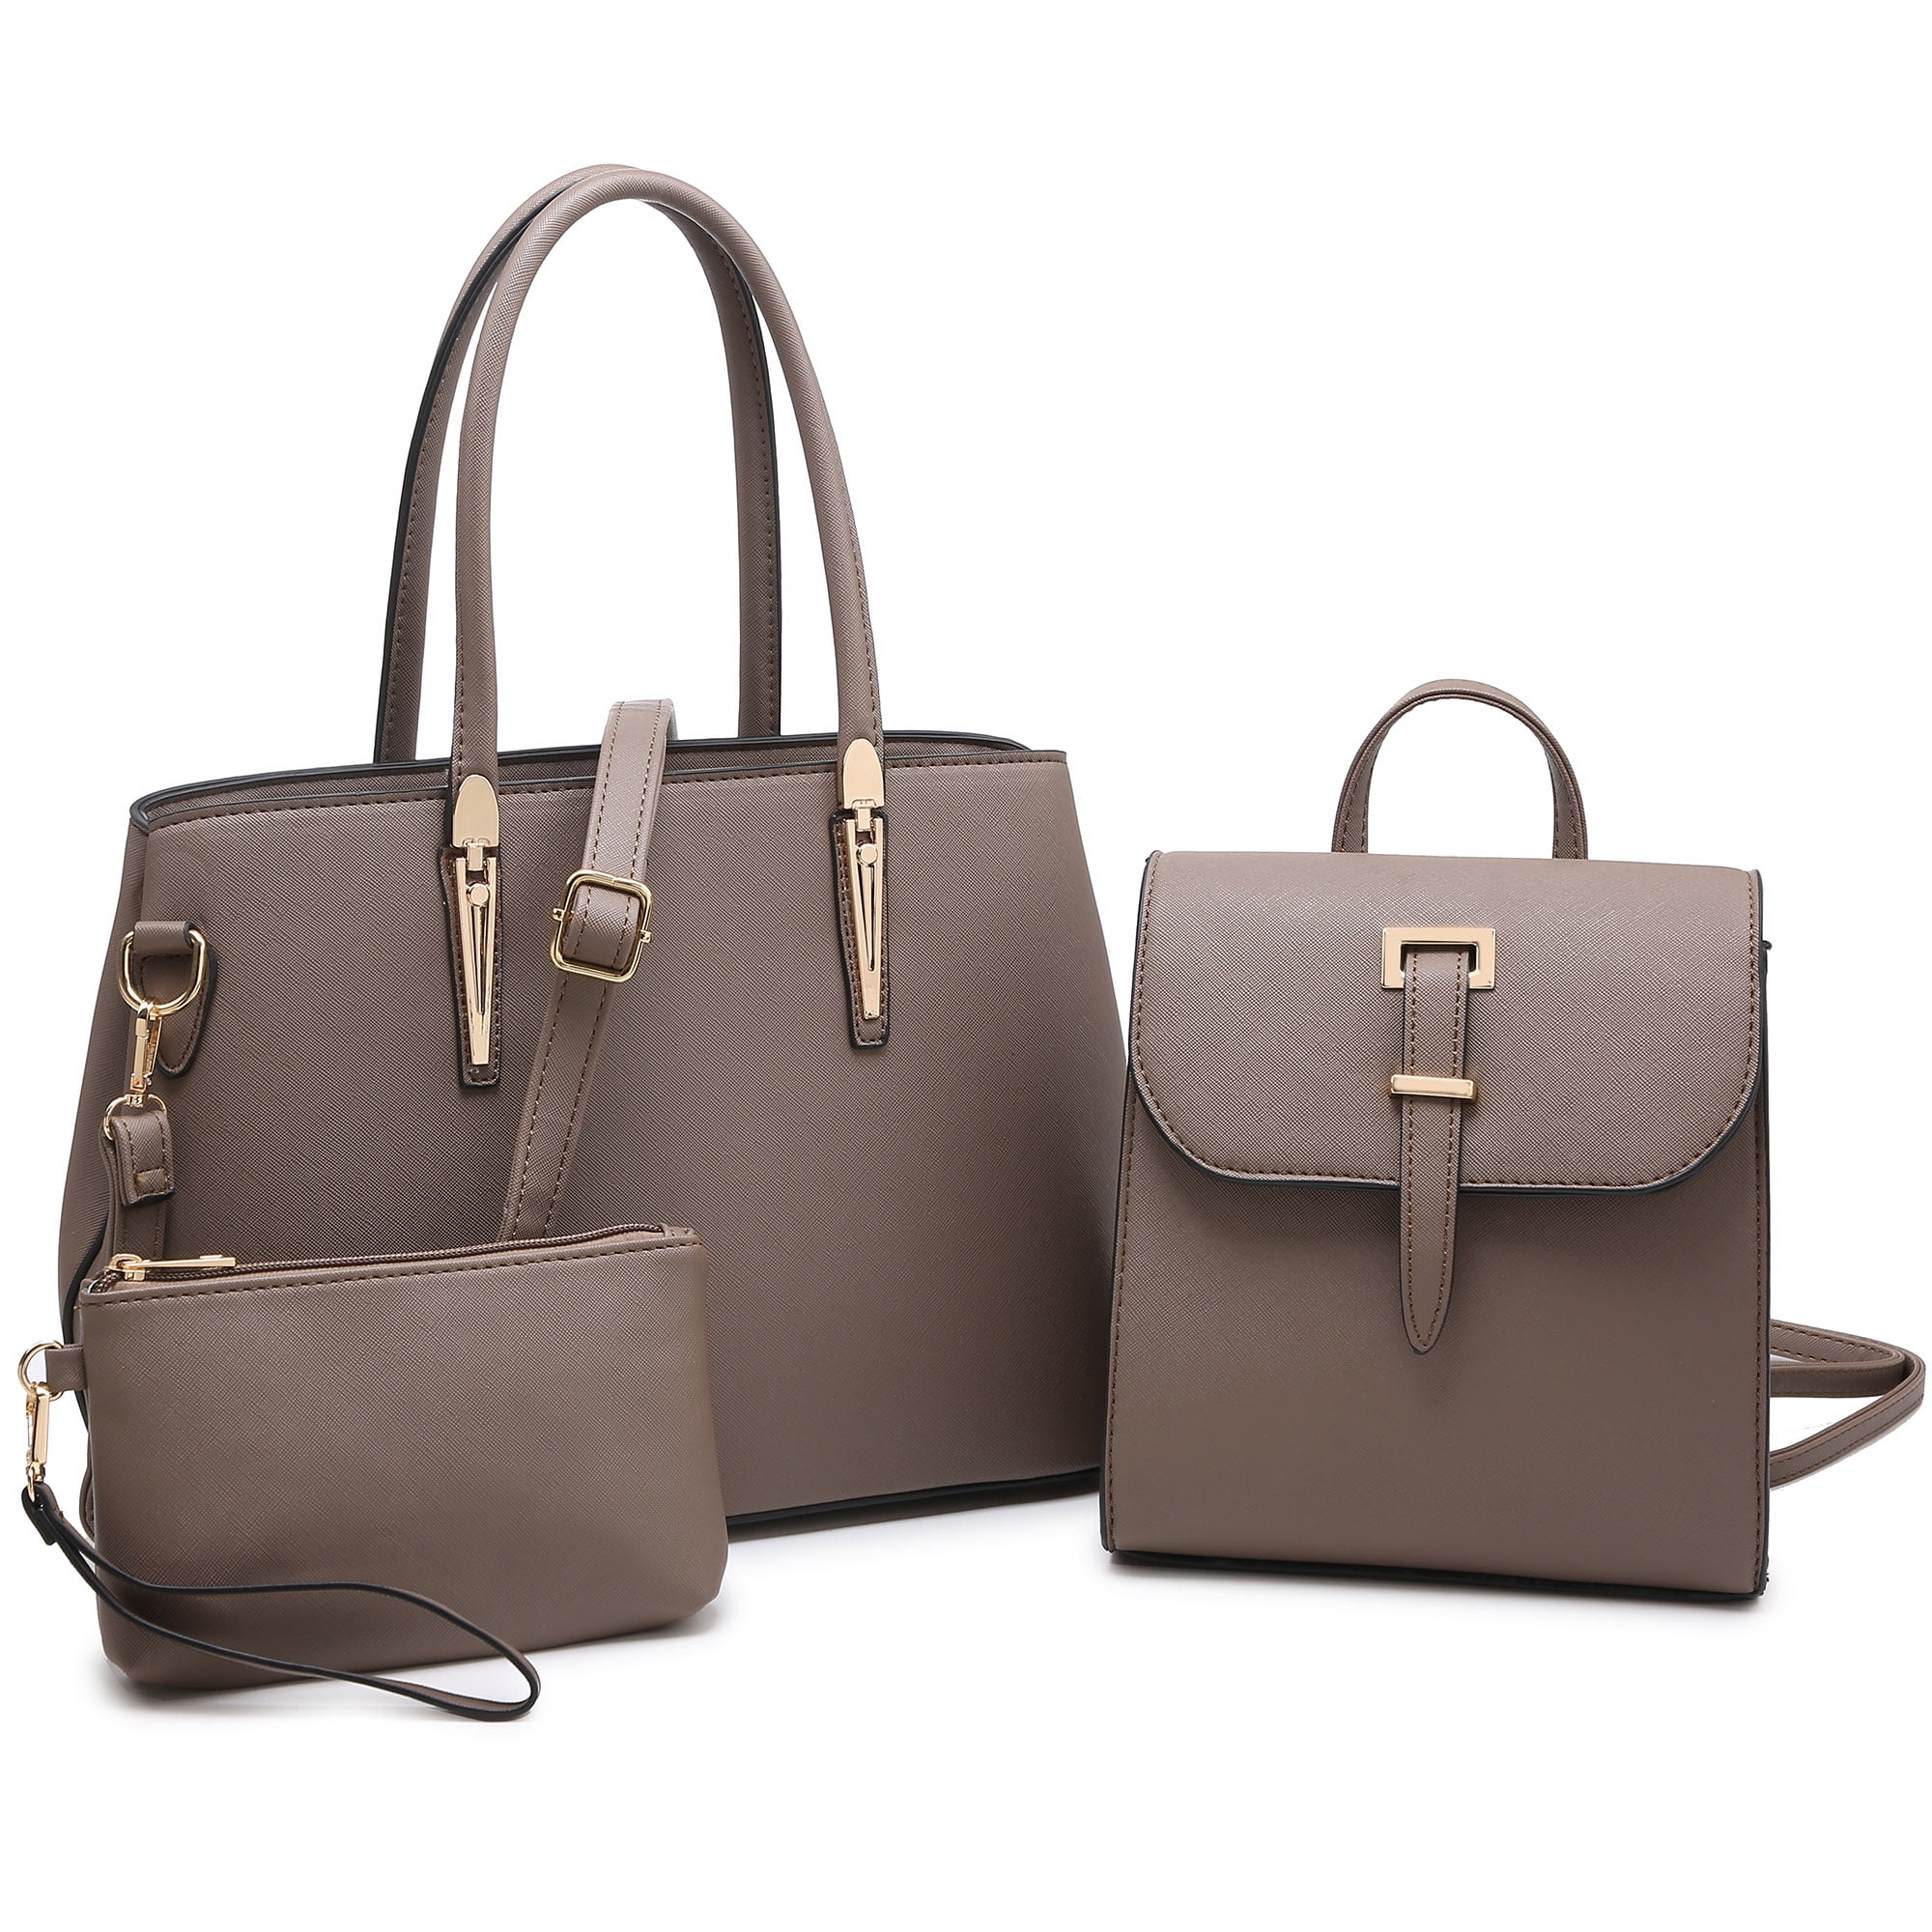 xB Women's Leather Tote Purse and Handbags Set